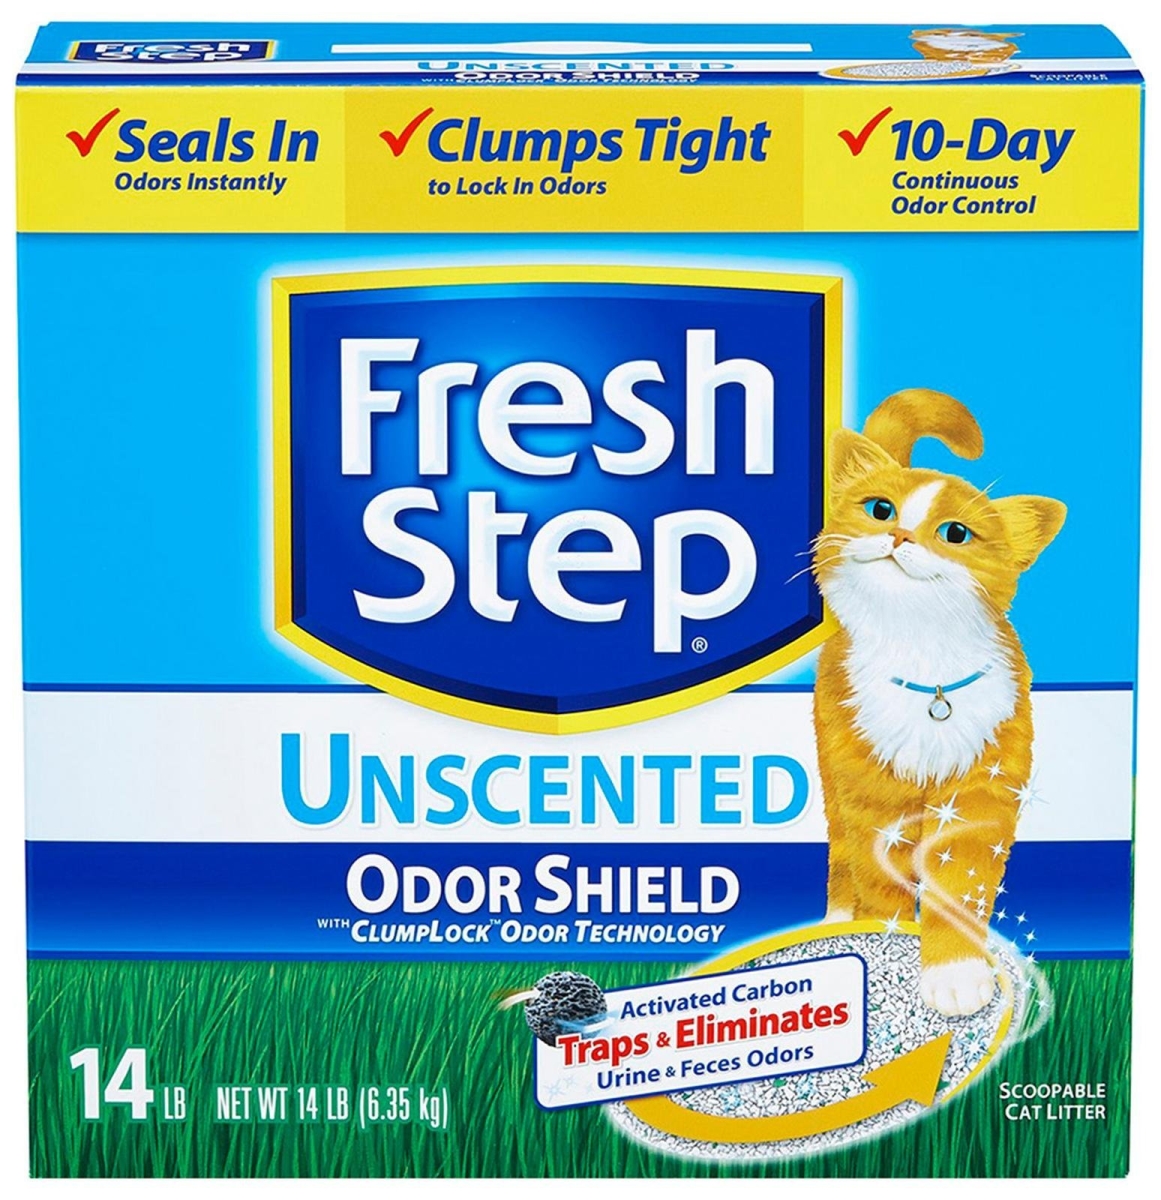 Clorox 261353 14 Lbs Fresh Step Cat Litter Odor Shield Scoopable, Unscented - Case Of 3